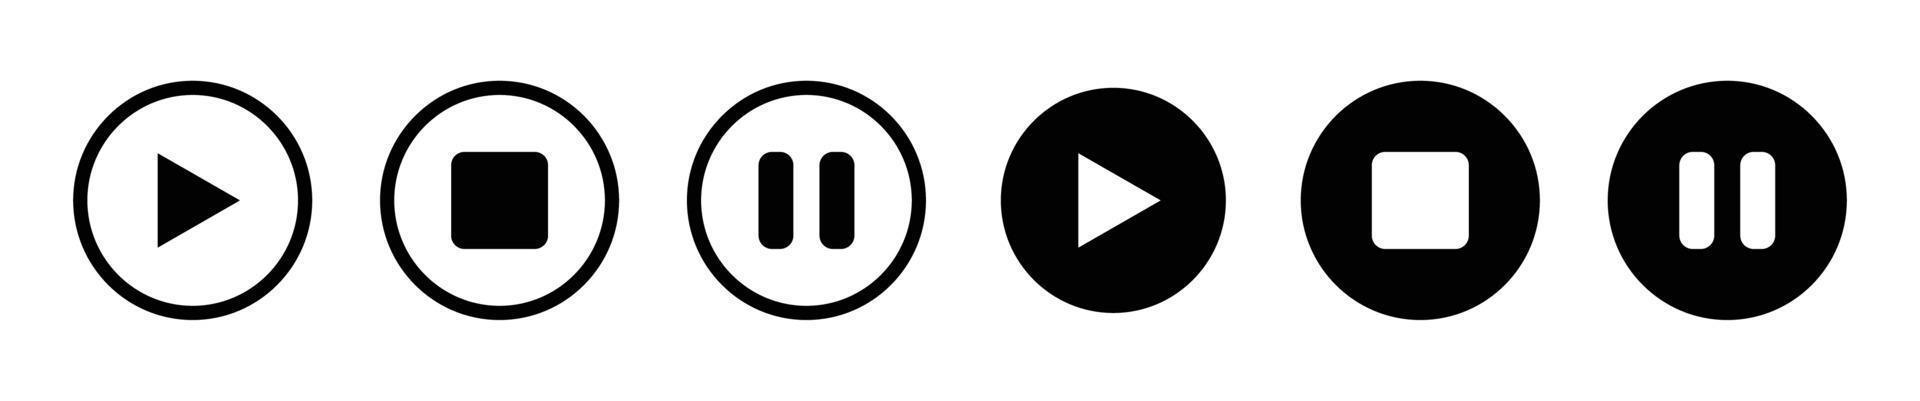 Play and pause buttons - vector icon illustration design. Video Audio Player. Player Button set icon symbol